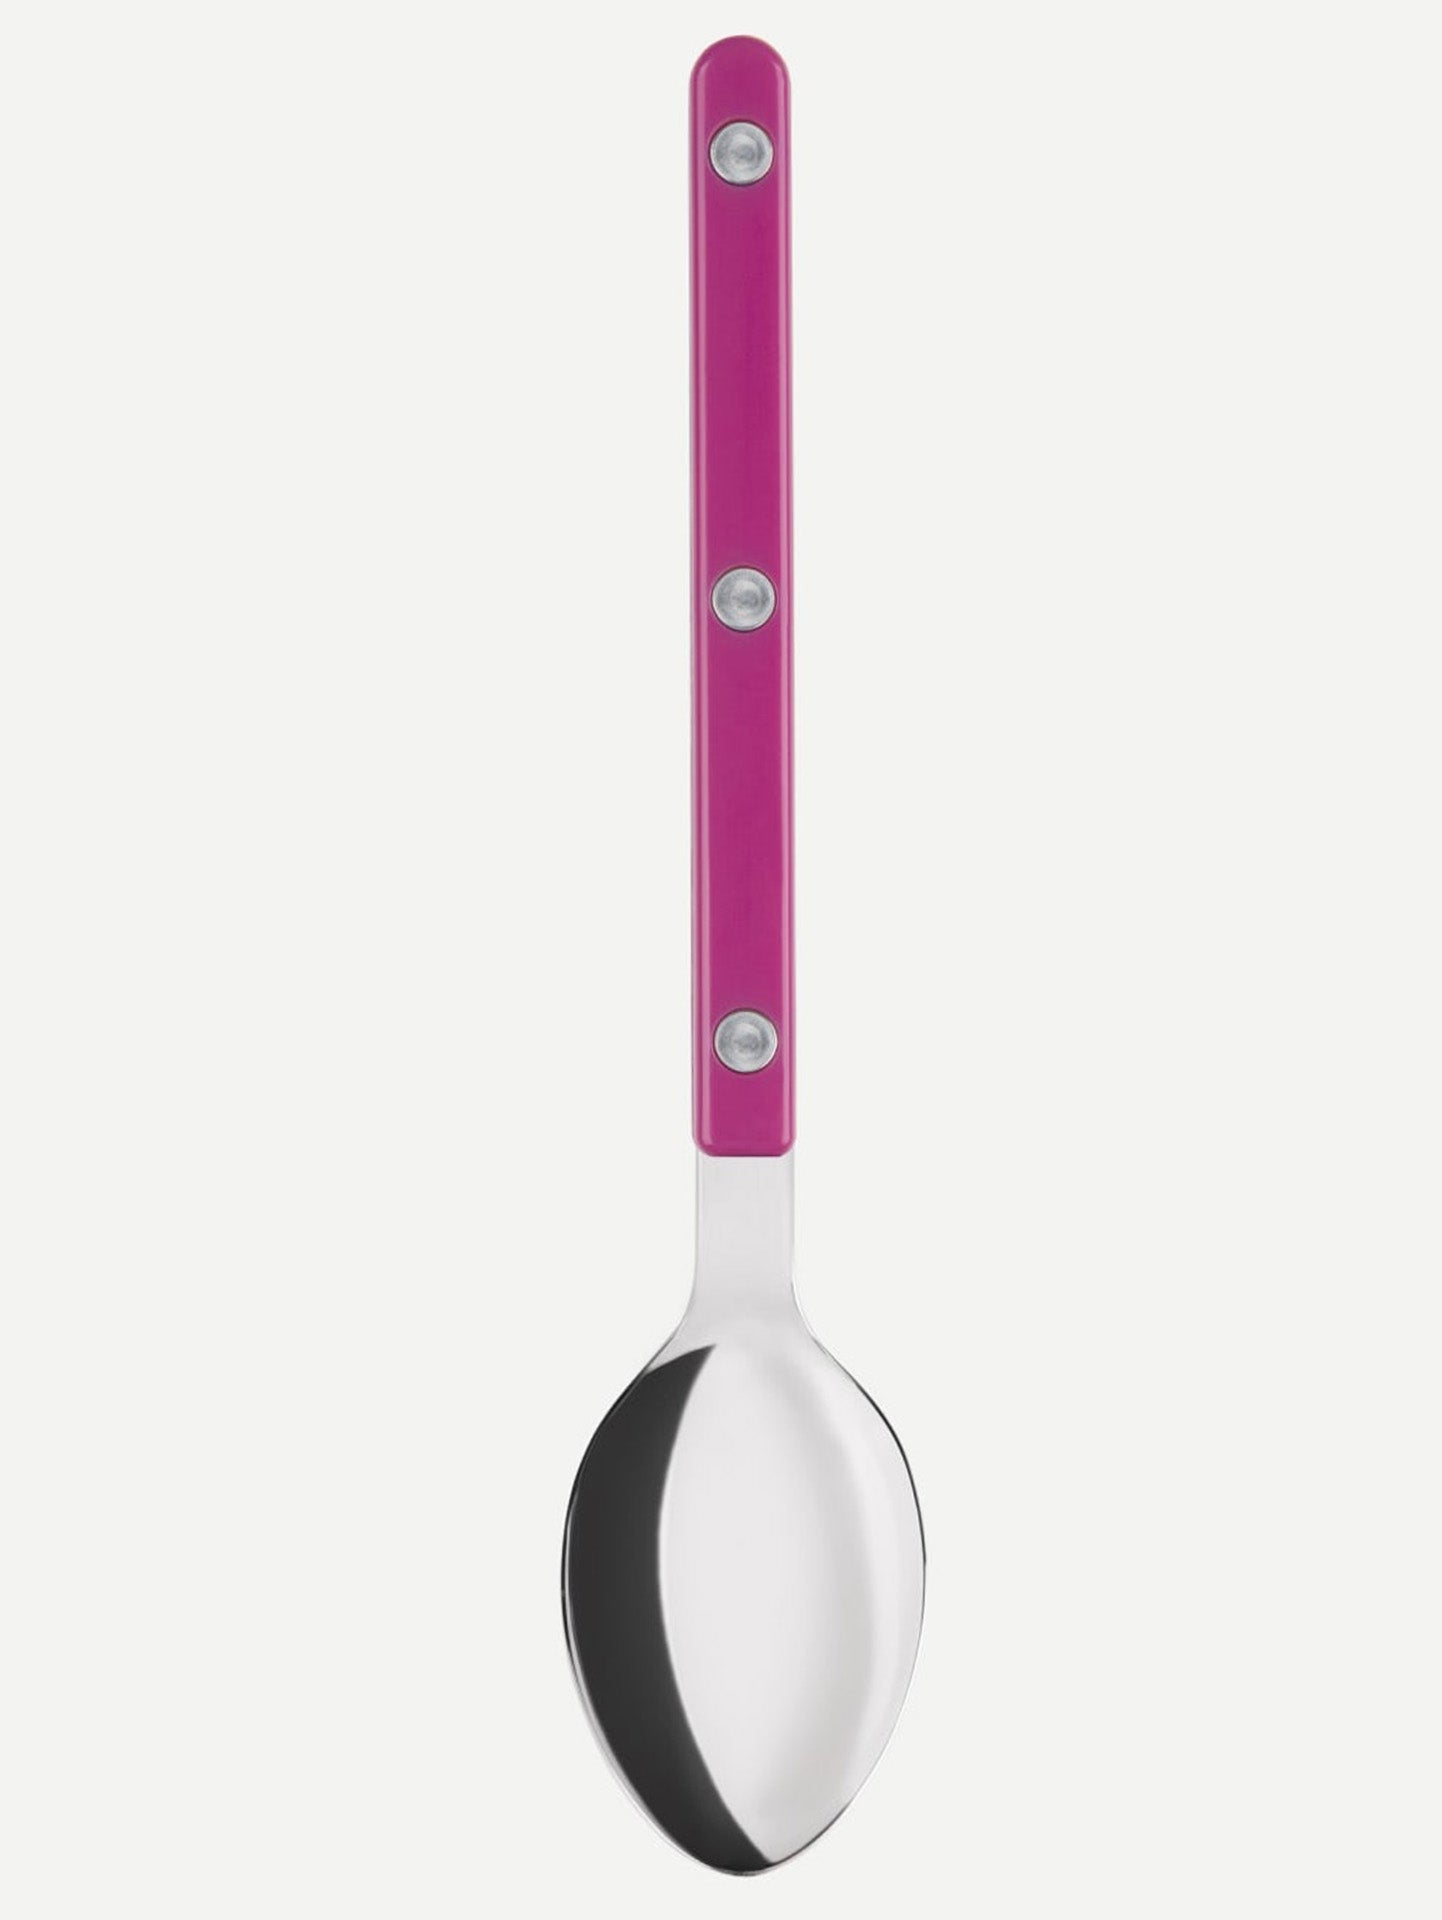 This cute dessert spoon from the Bistrot series by Sabre Paris is made from shiny stainless steel. The spoon is 19 cm, the bright deep pink handle is acrylic with metal rivets. It's easy to clean in the dishwasher!